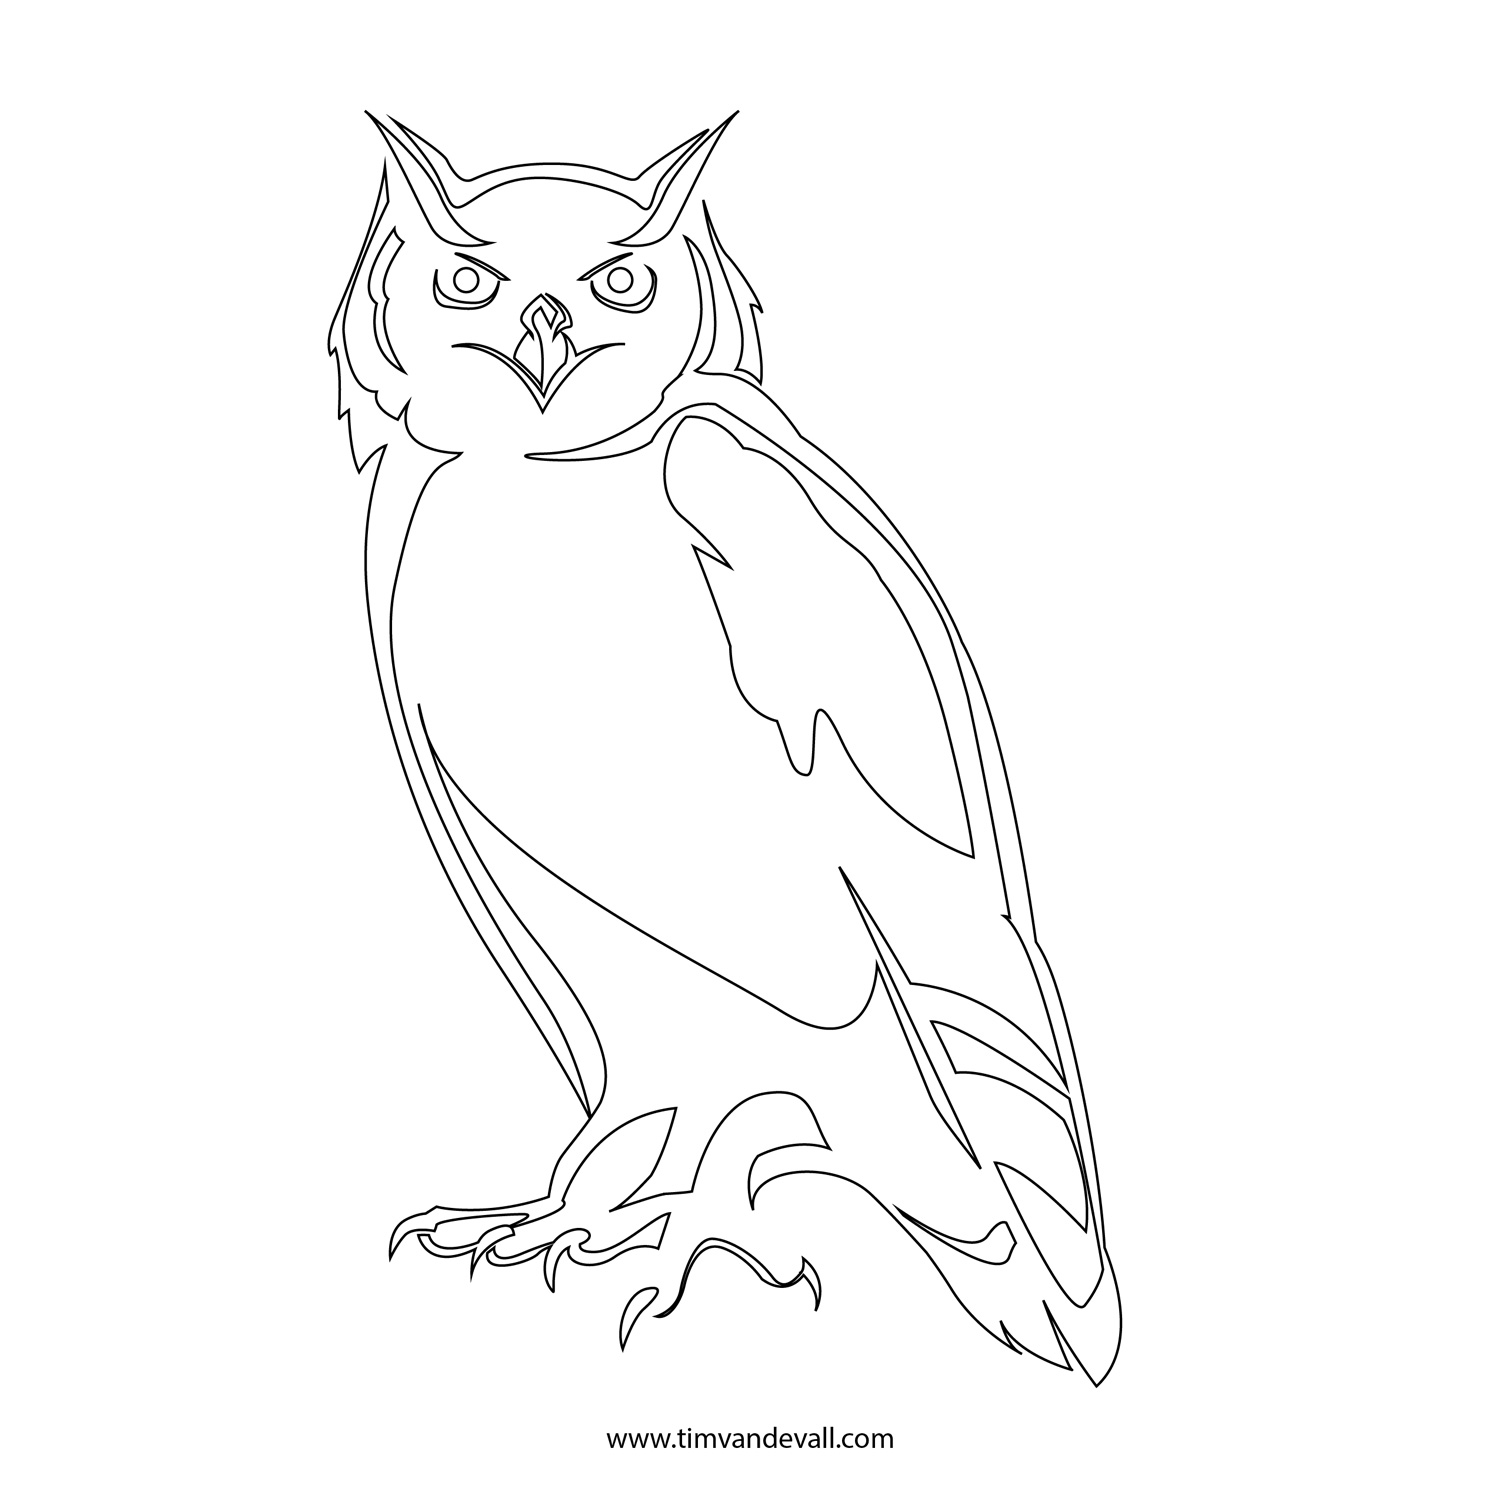 Owl Stencil Template | Free Printable Owl Outline  Silhouette